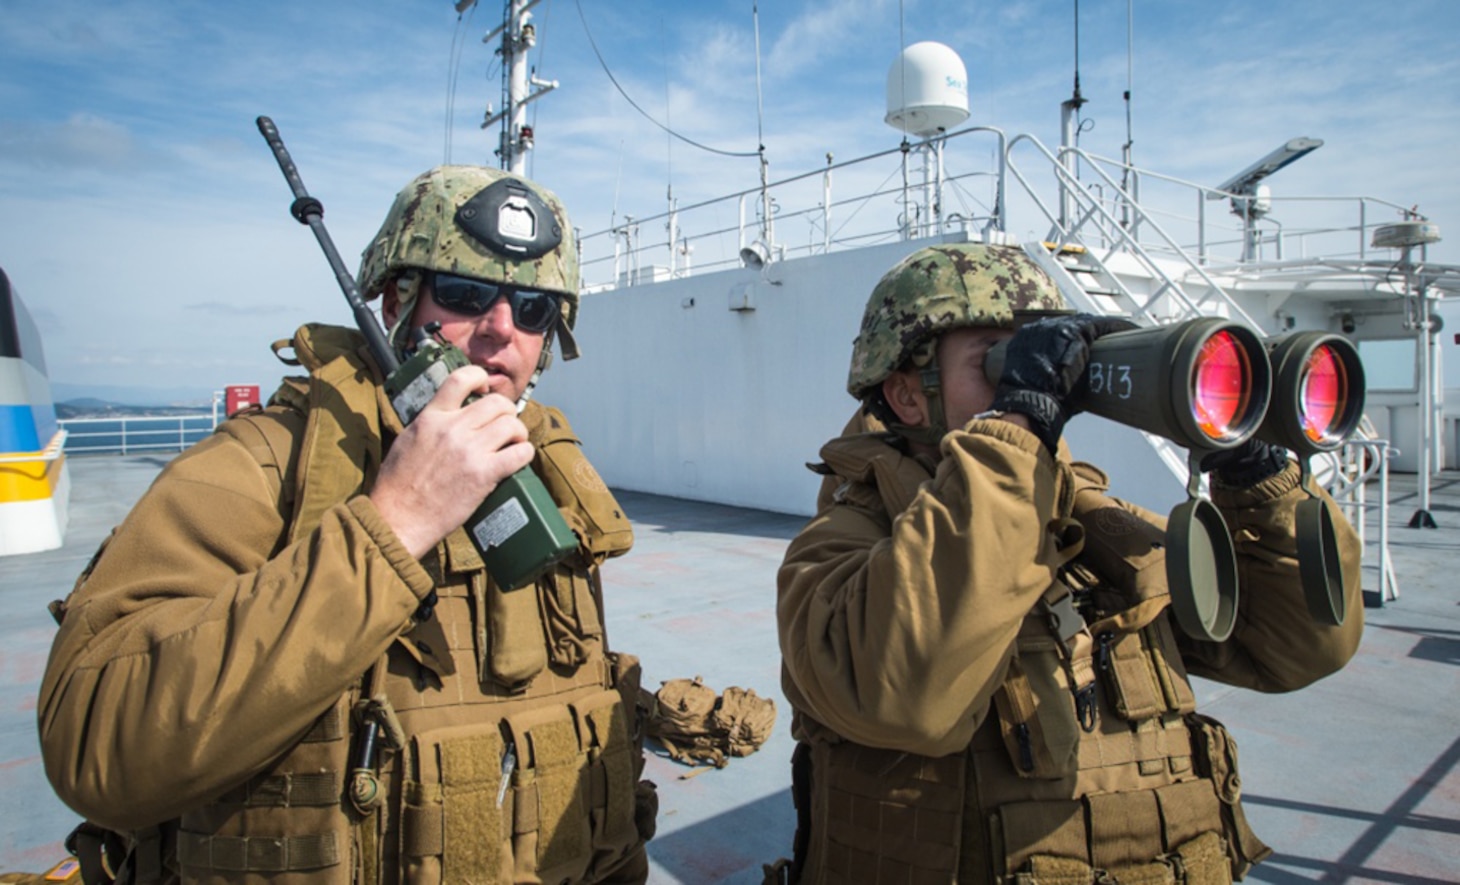 Chief Master-at-Arms Jason Wage and Master-at-Arms 2nd Class Emilio Donatlan, both assigned to Coastal Riverine Group 1, report an incoming vessel to the U.S. Coast Guard's Port Security Unit 312 during a small-boat training scenario off the coast of Pohang during Operation Pacific Reach Exercise 2017 (OPRex17), April 10, 2017. OPRex17 is a bilateral training event designed to ensure readiness and sustain the ROK-U.S. alliance by exercising an area distribution center, an air terminal supply point, combined joint logistics over-the-shore, the use of rail, inland waterways, and the coastal lift operations to validate the operational reach concept.